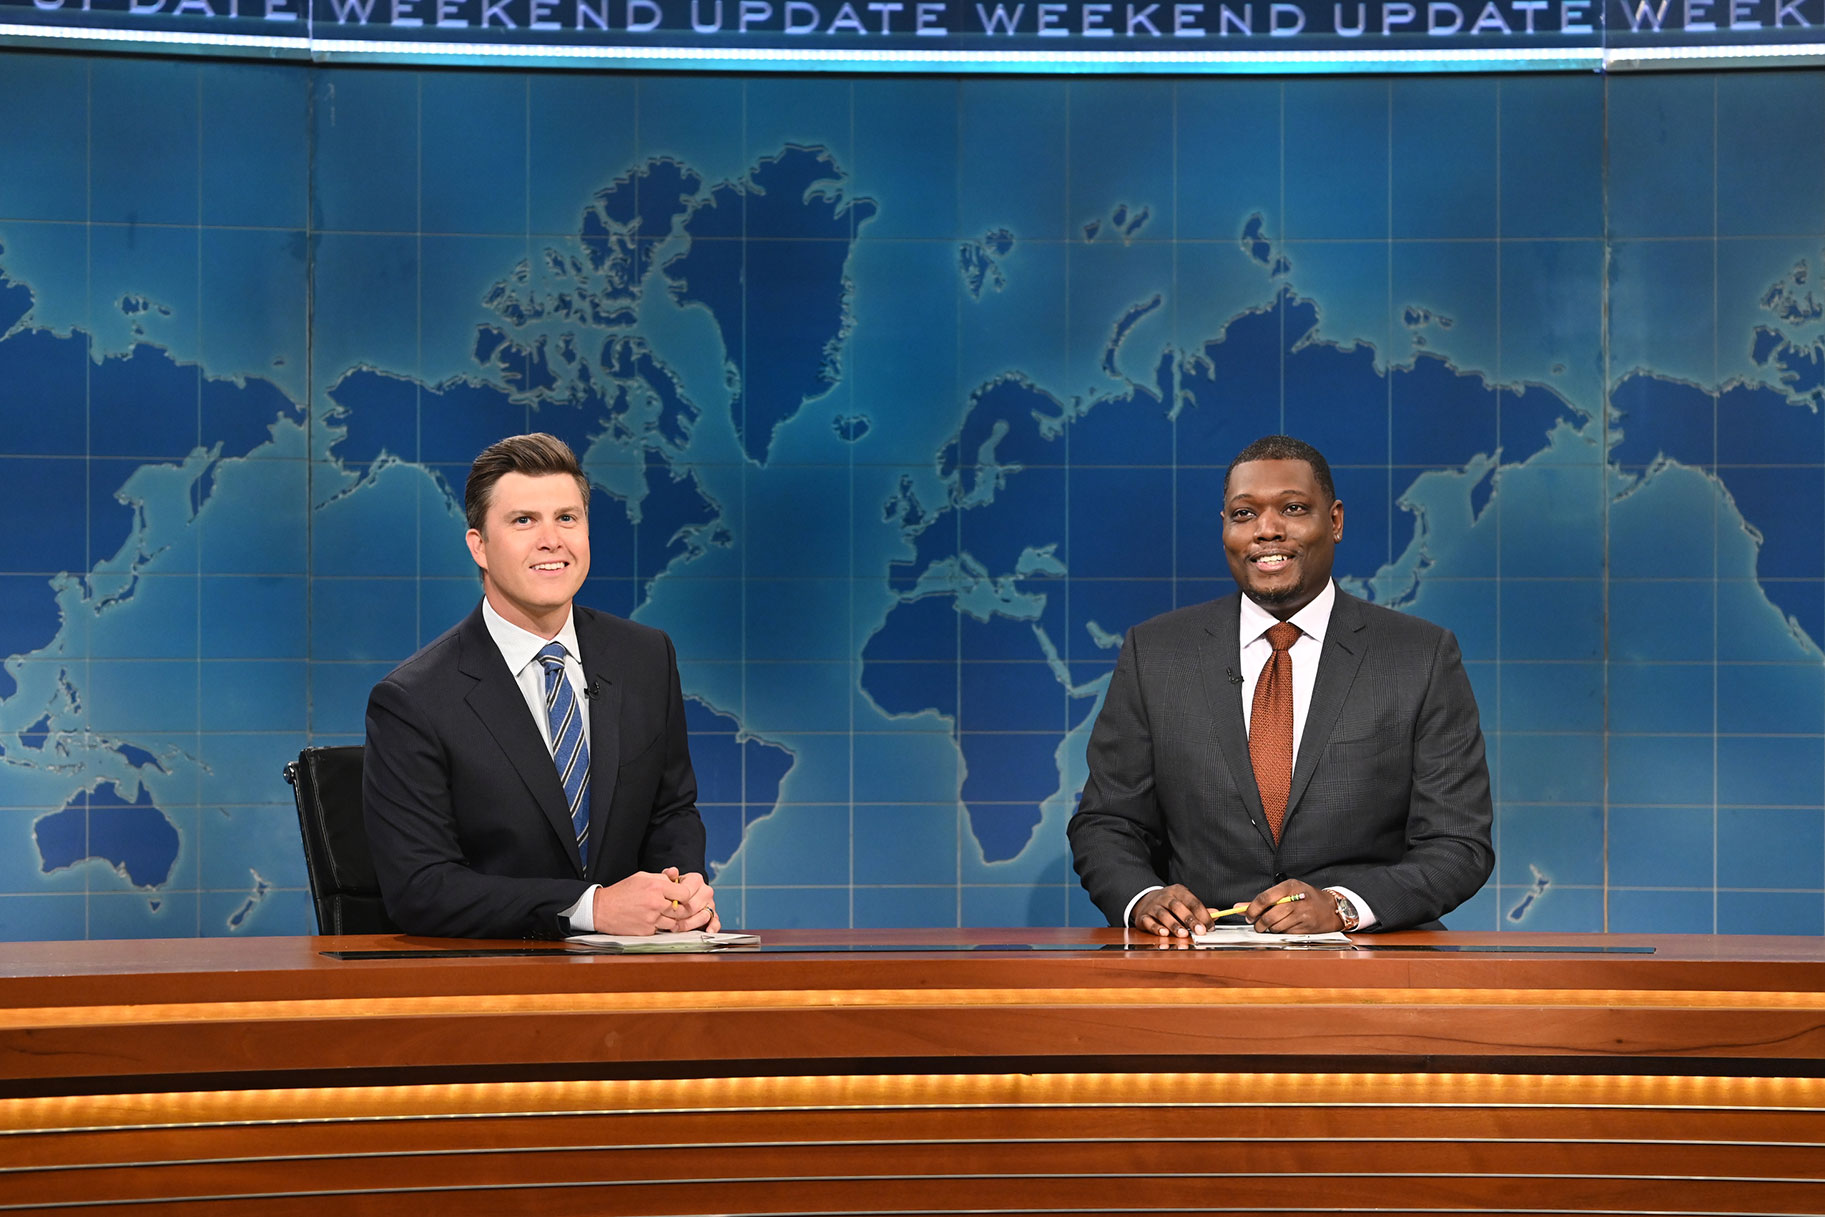 Colin Jost and Michael Che sitting at the Weekend Update desk